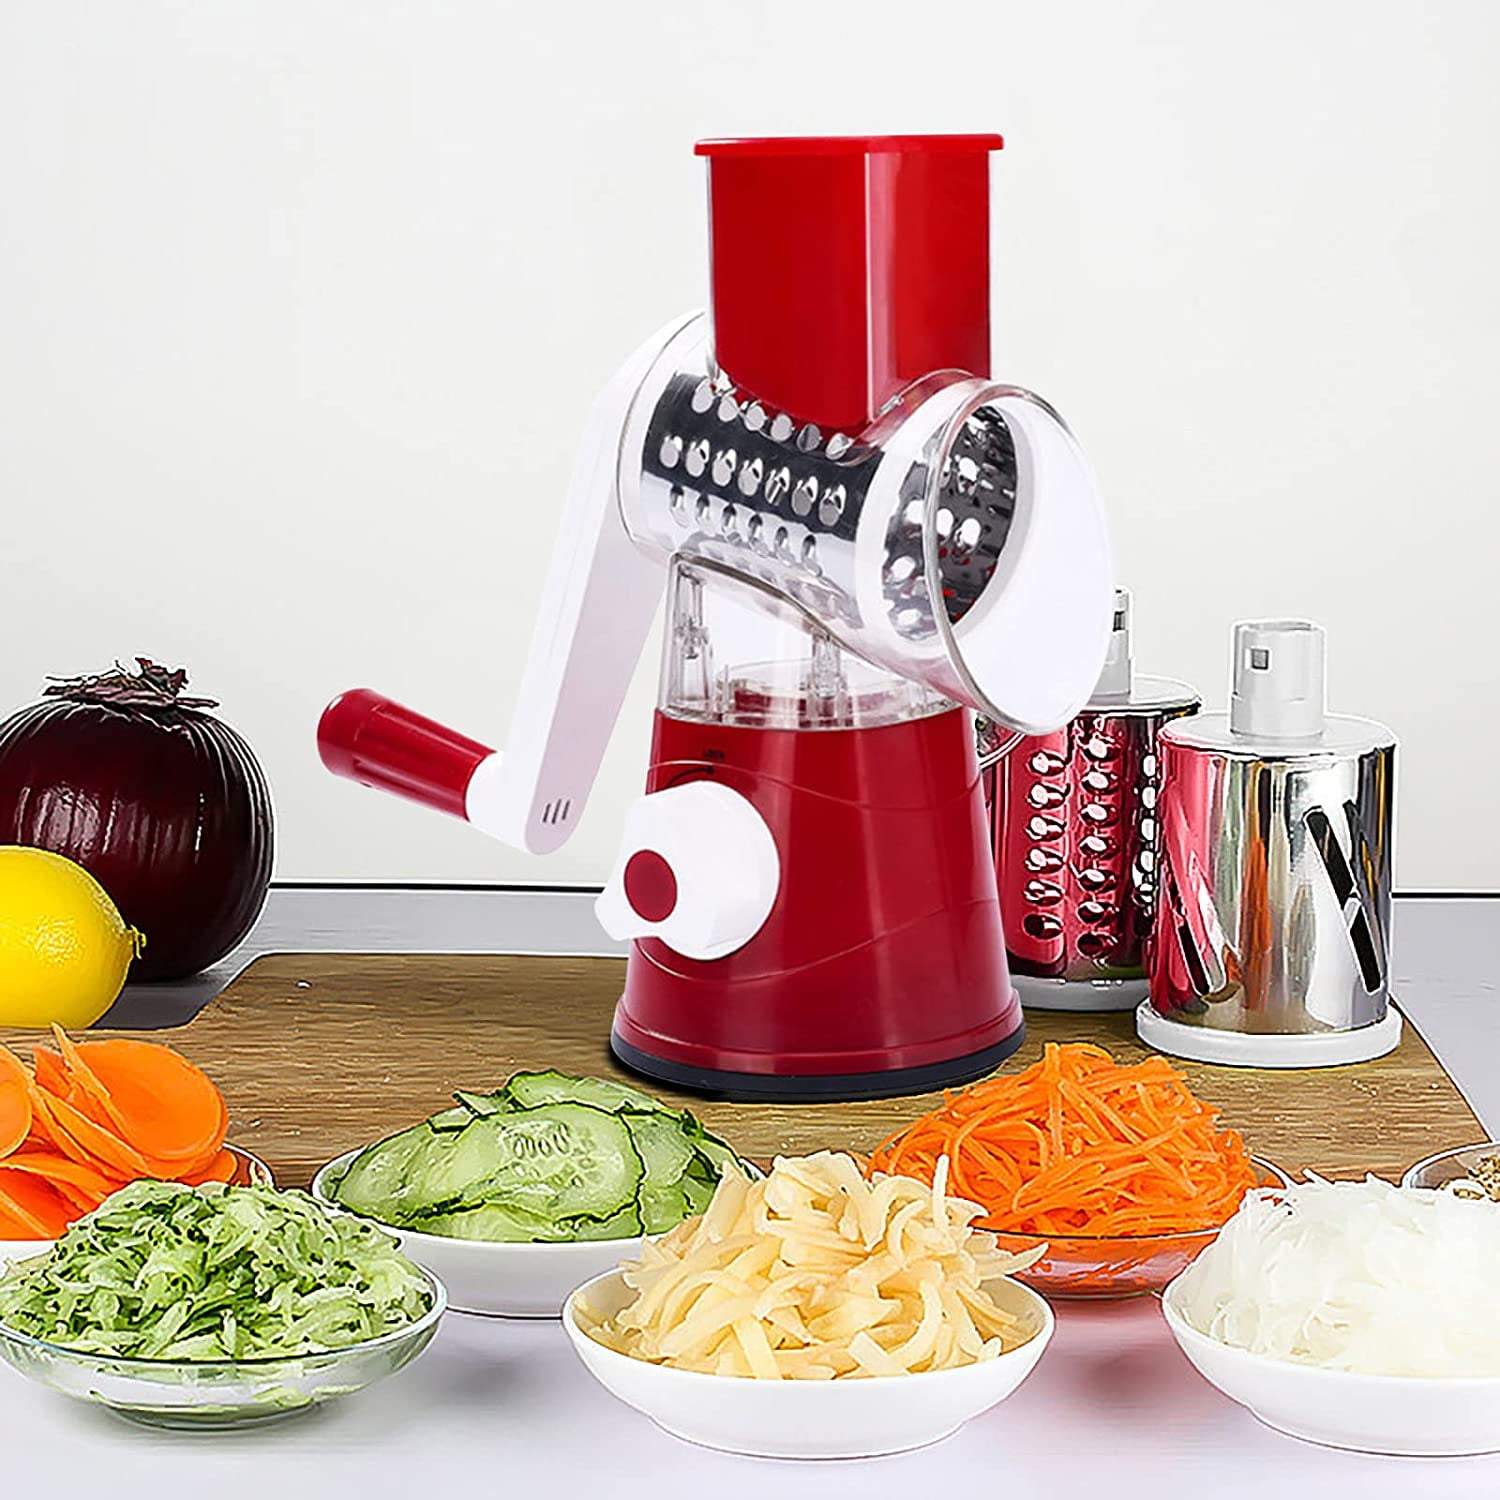 Multifunctional Vegetable Cutter Slicer Commercial Dicing Machine Small  Electric